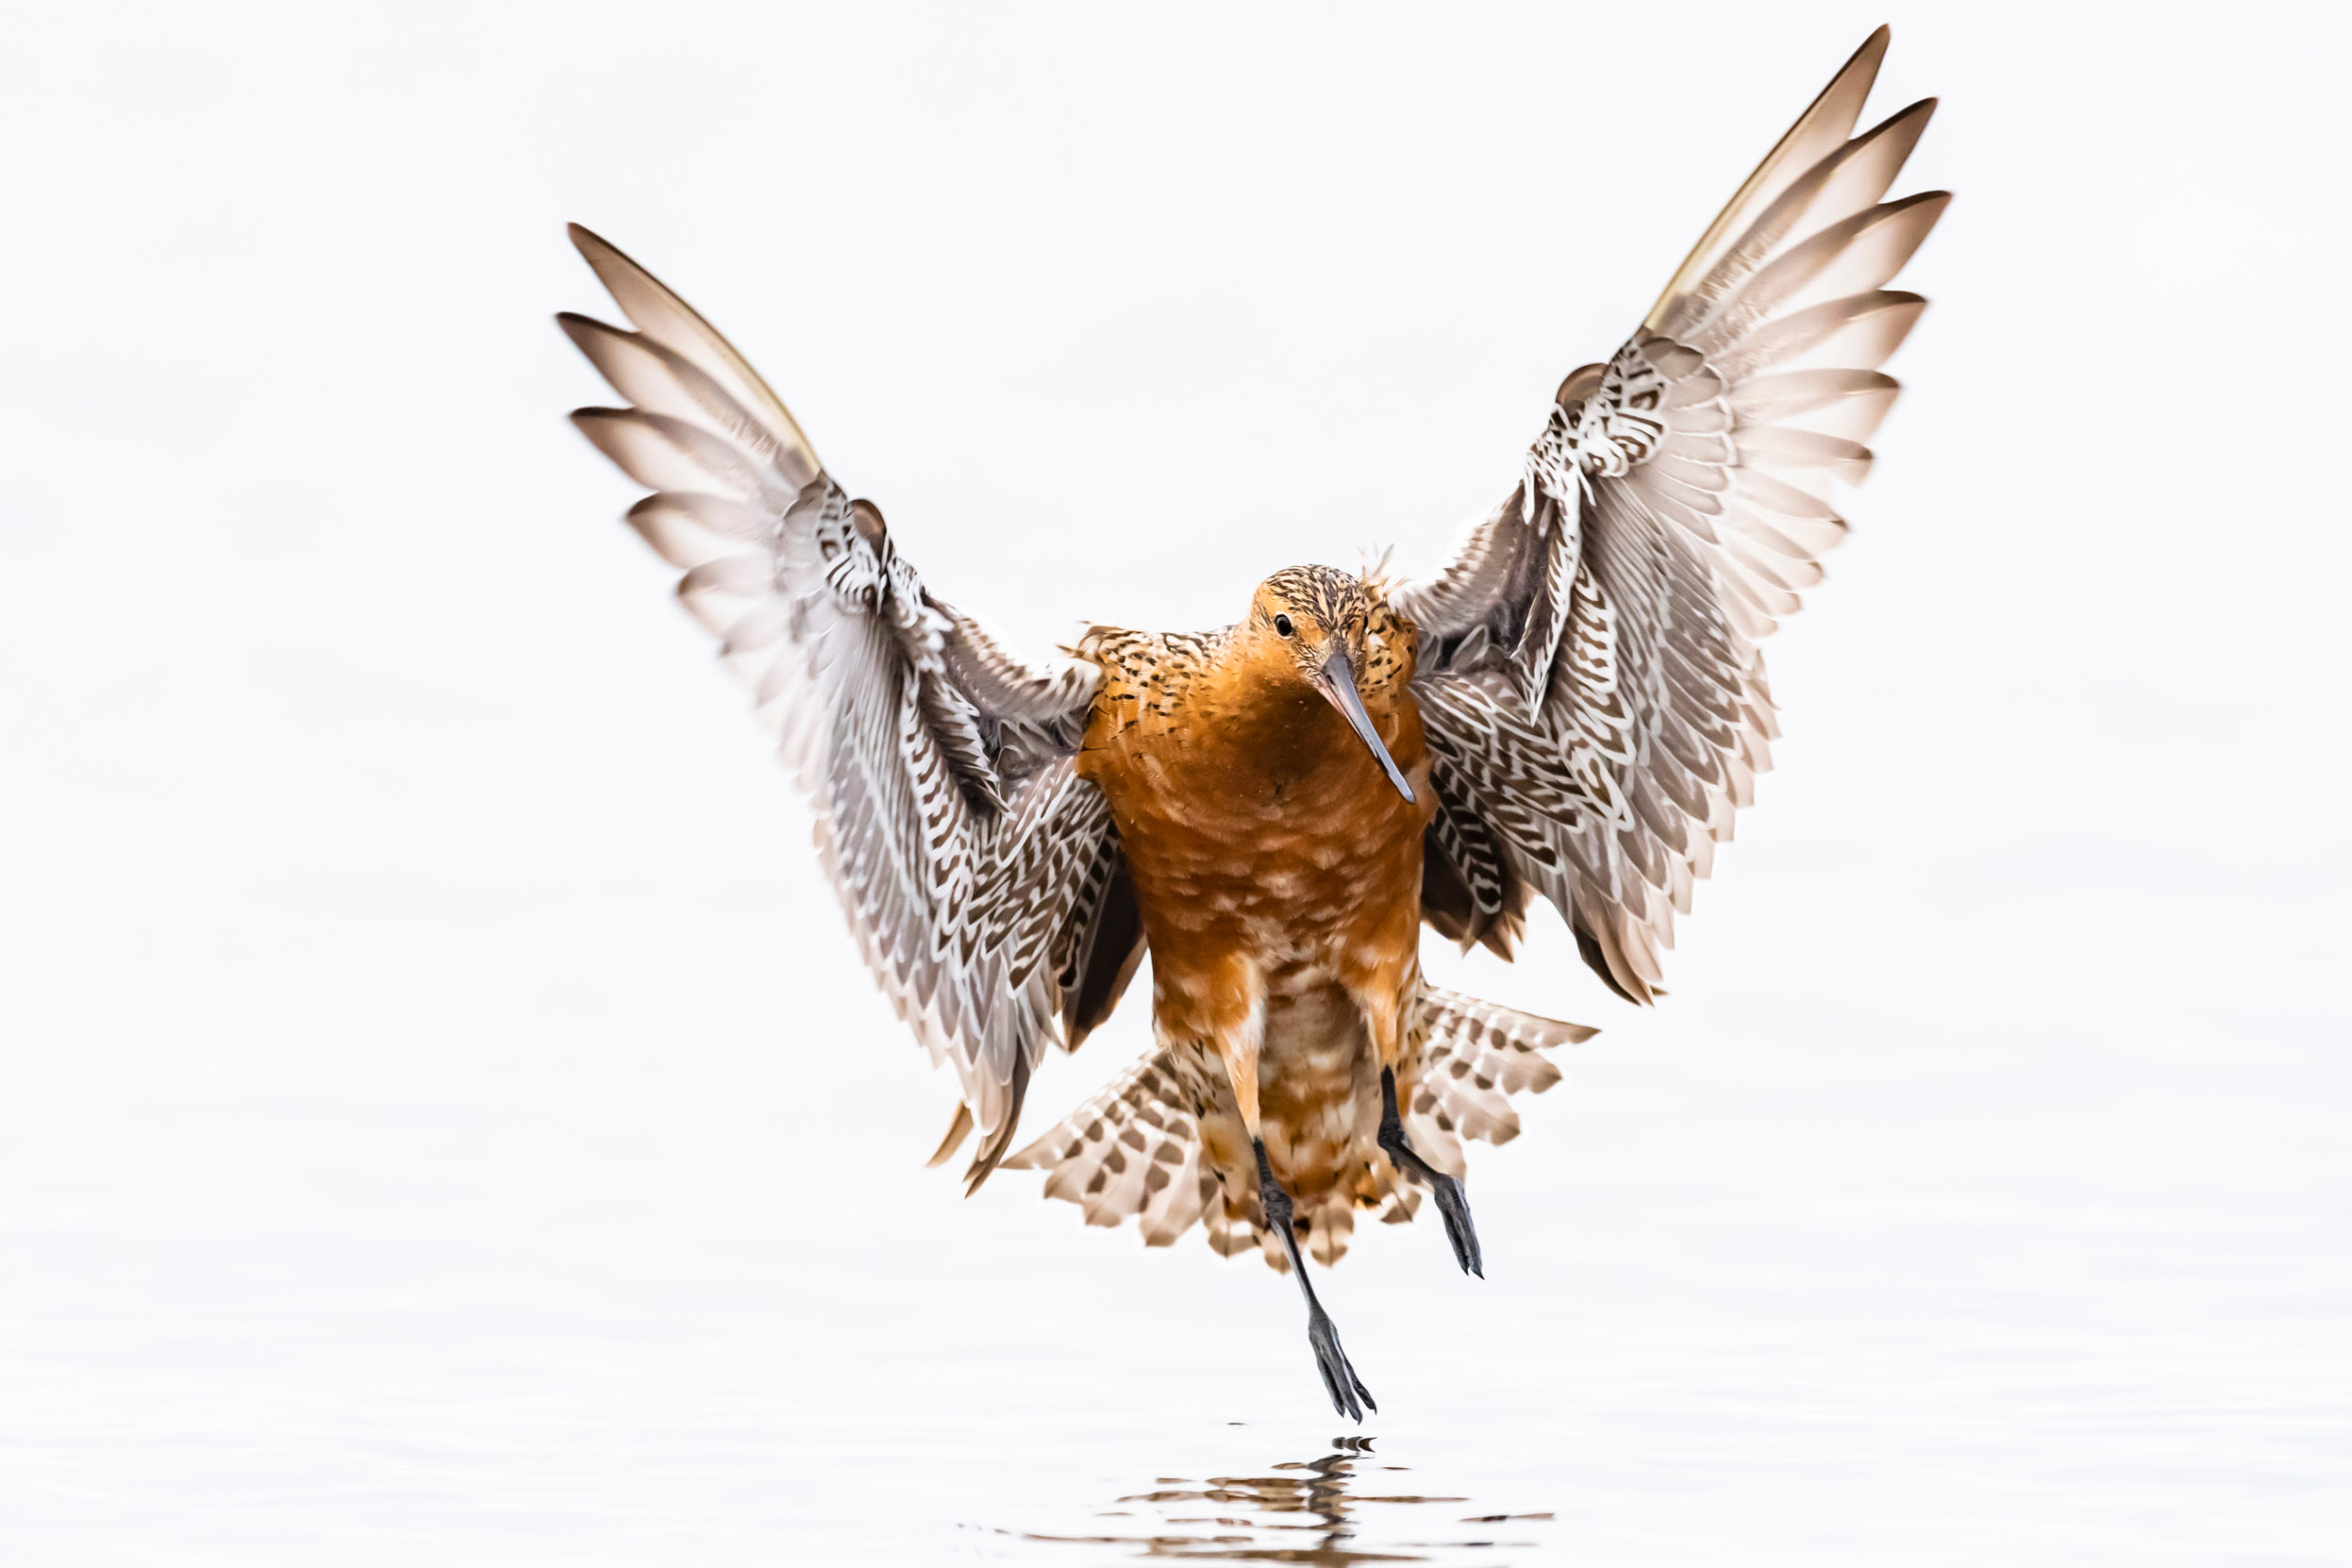 A Bar-tailed Godwit flying above a body of water.